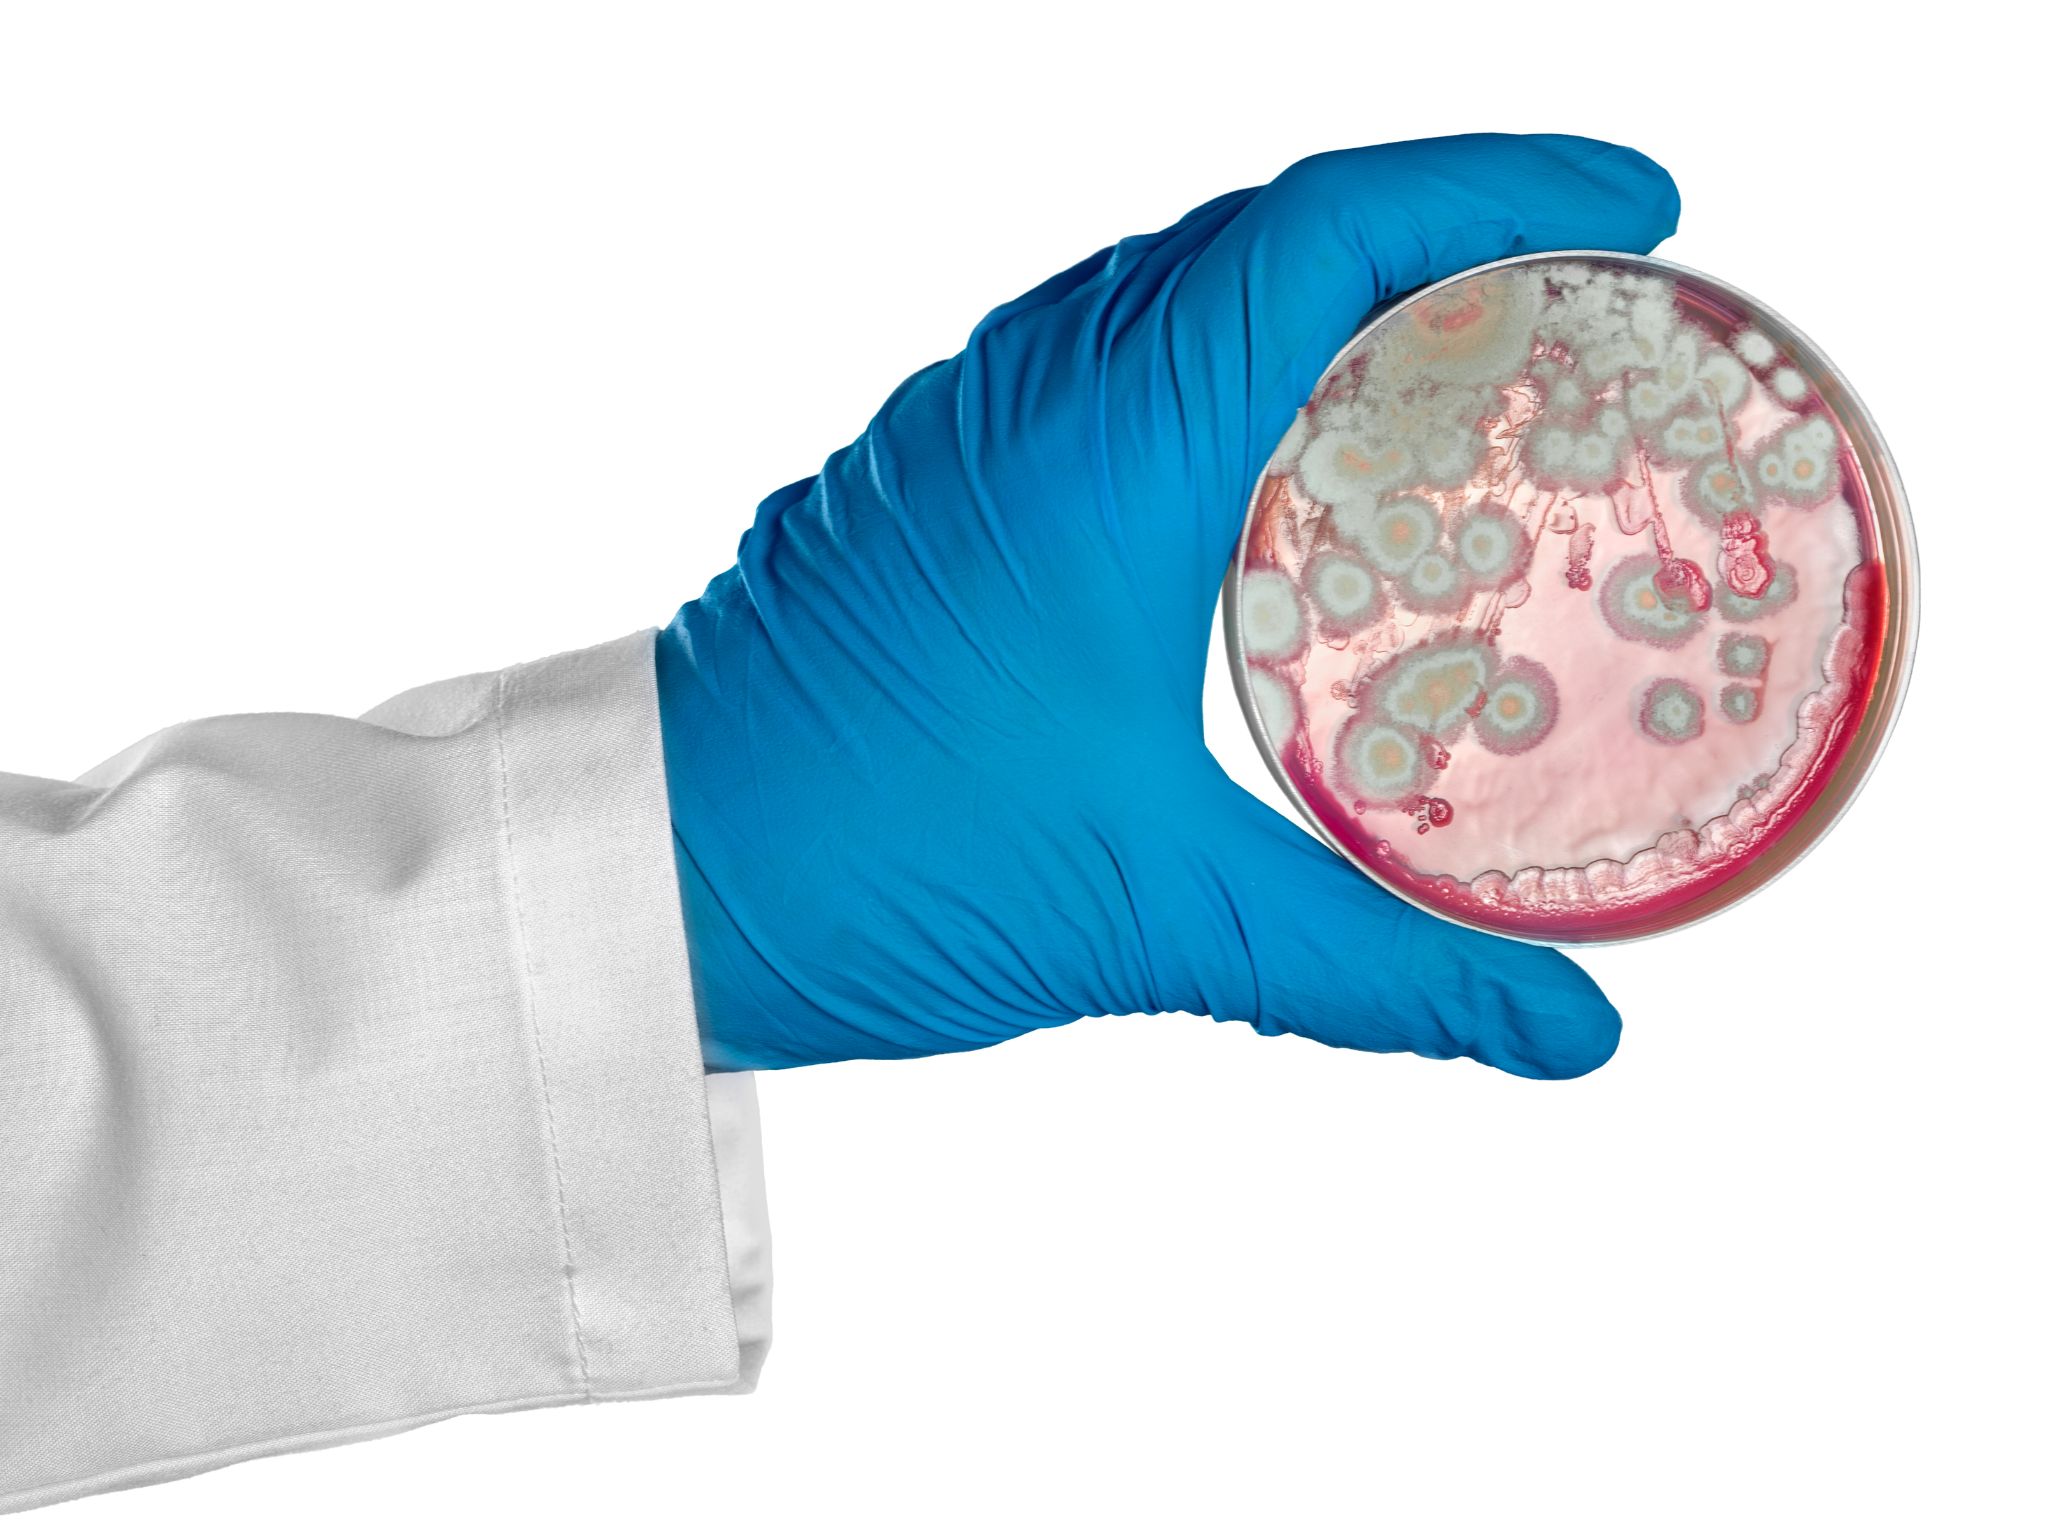 Hand wearing a rubber glove holds up a petri dish containing pink and green mold